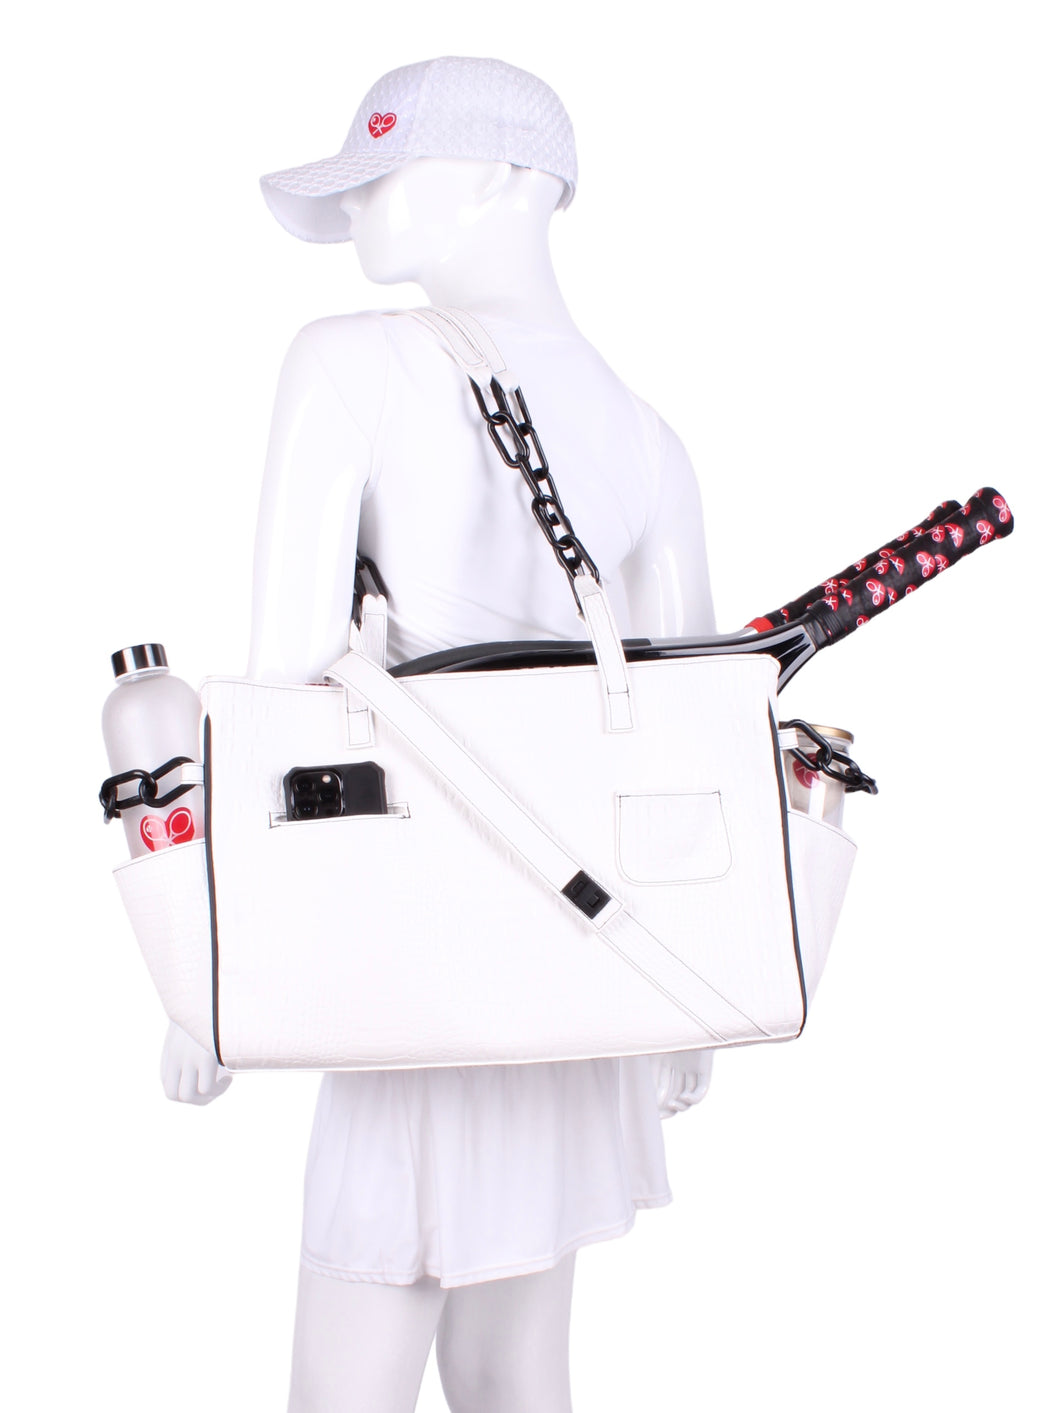 The Long Tennis Tote in White Vegan Alligator is our stylish, sexy and functional tennis bag designed to carry all your essentials for the game. 